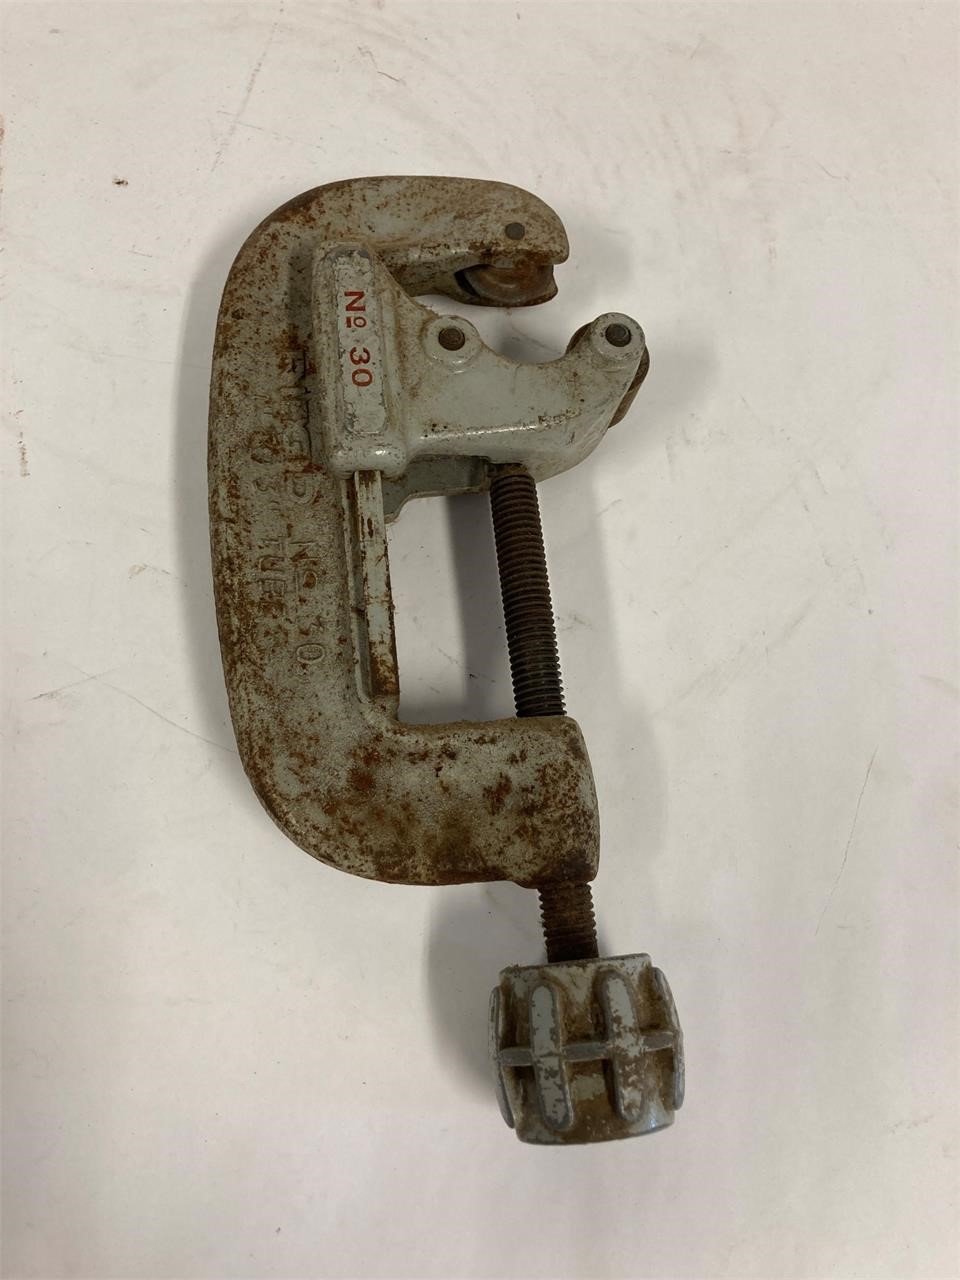 Rigid No 30 pipe cutter. Up to 3”